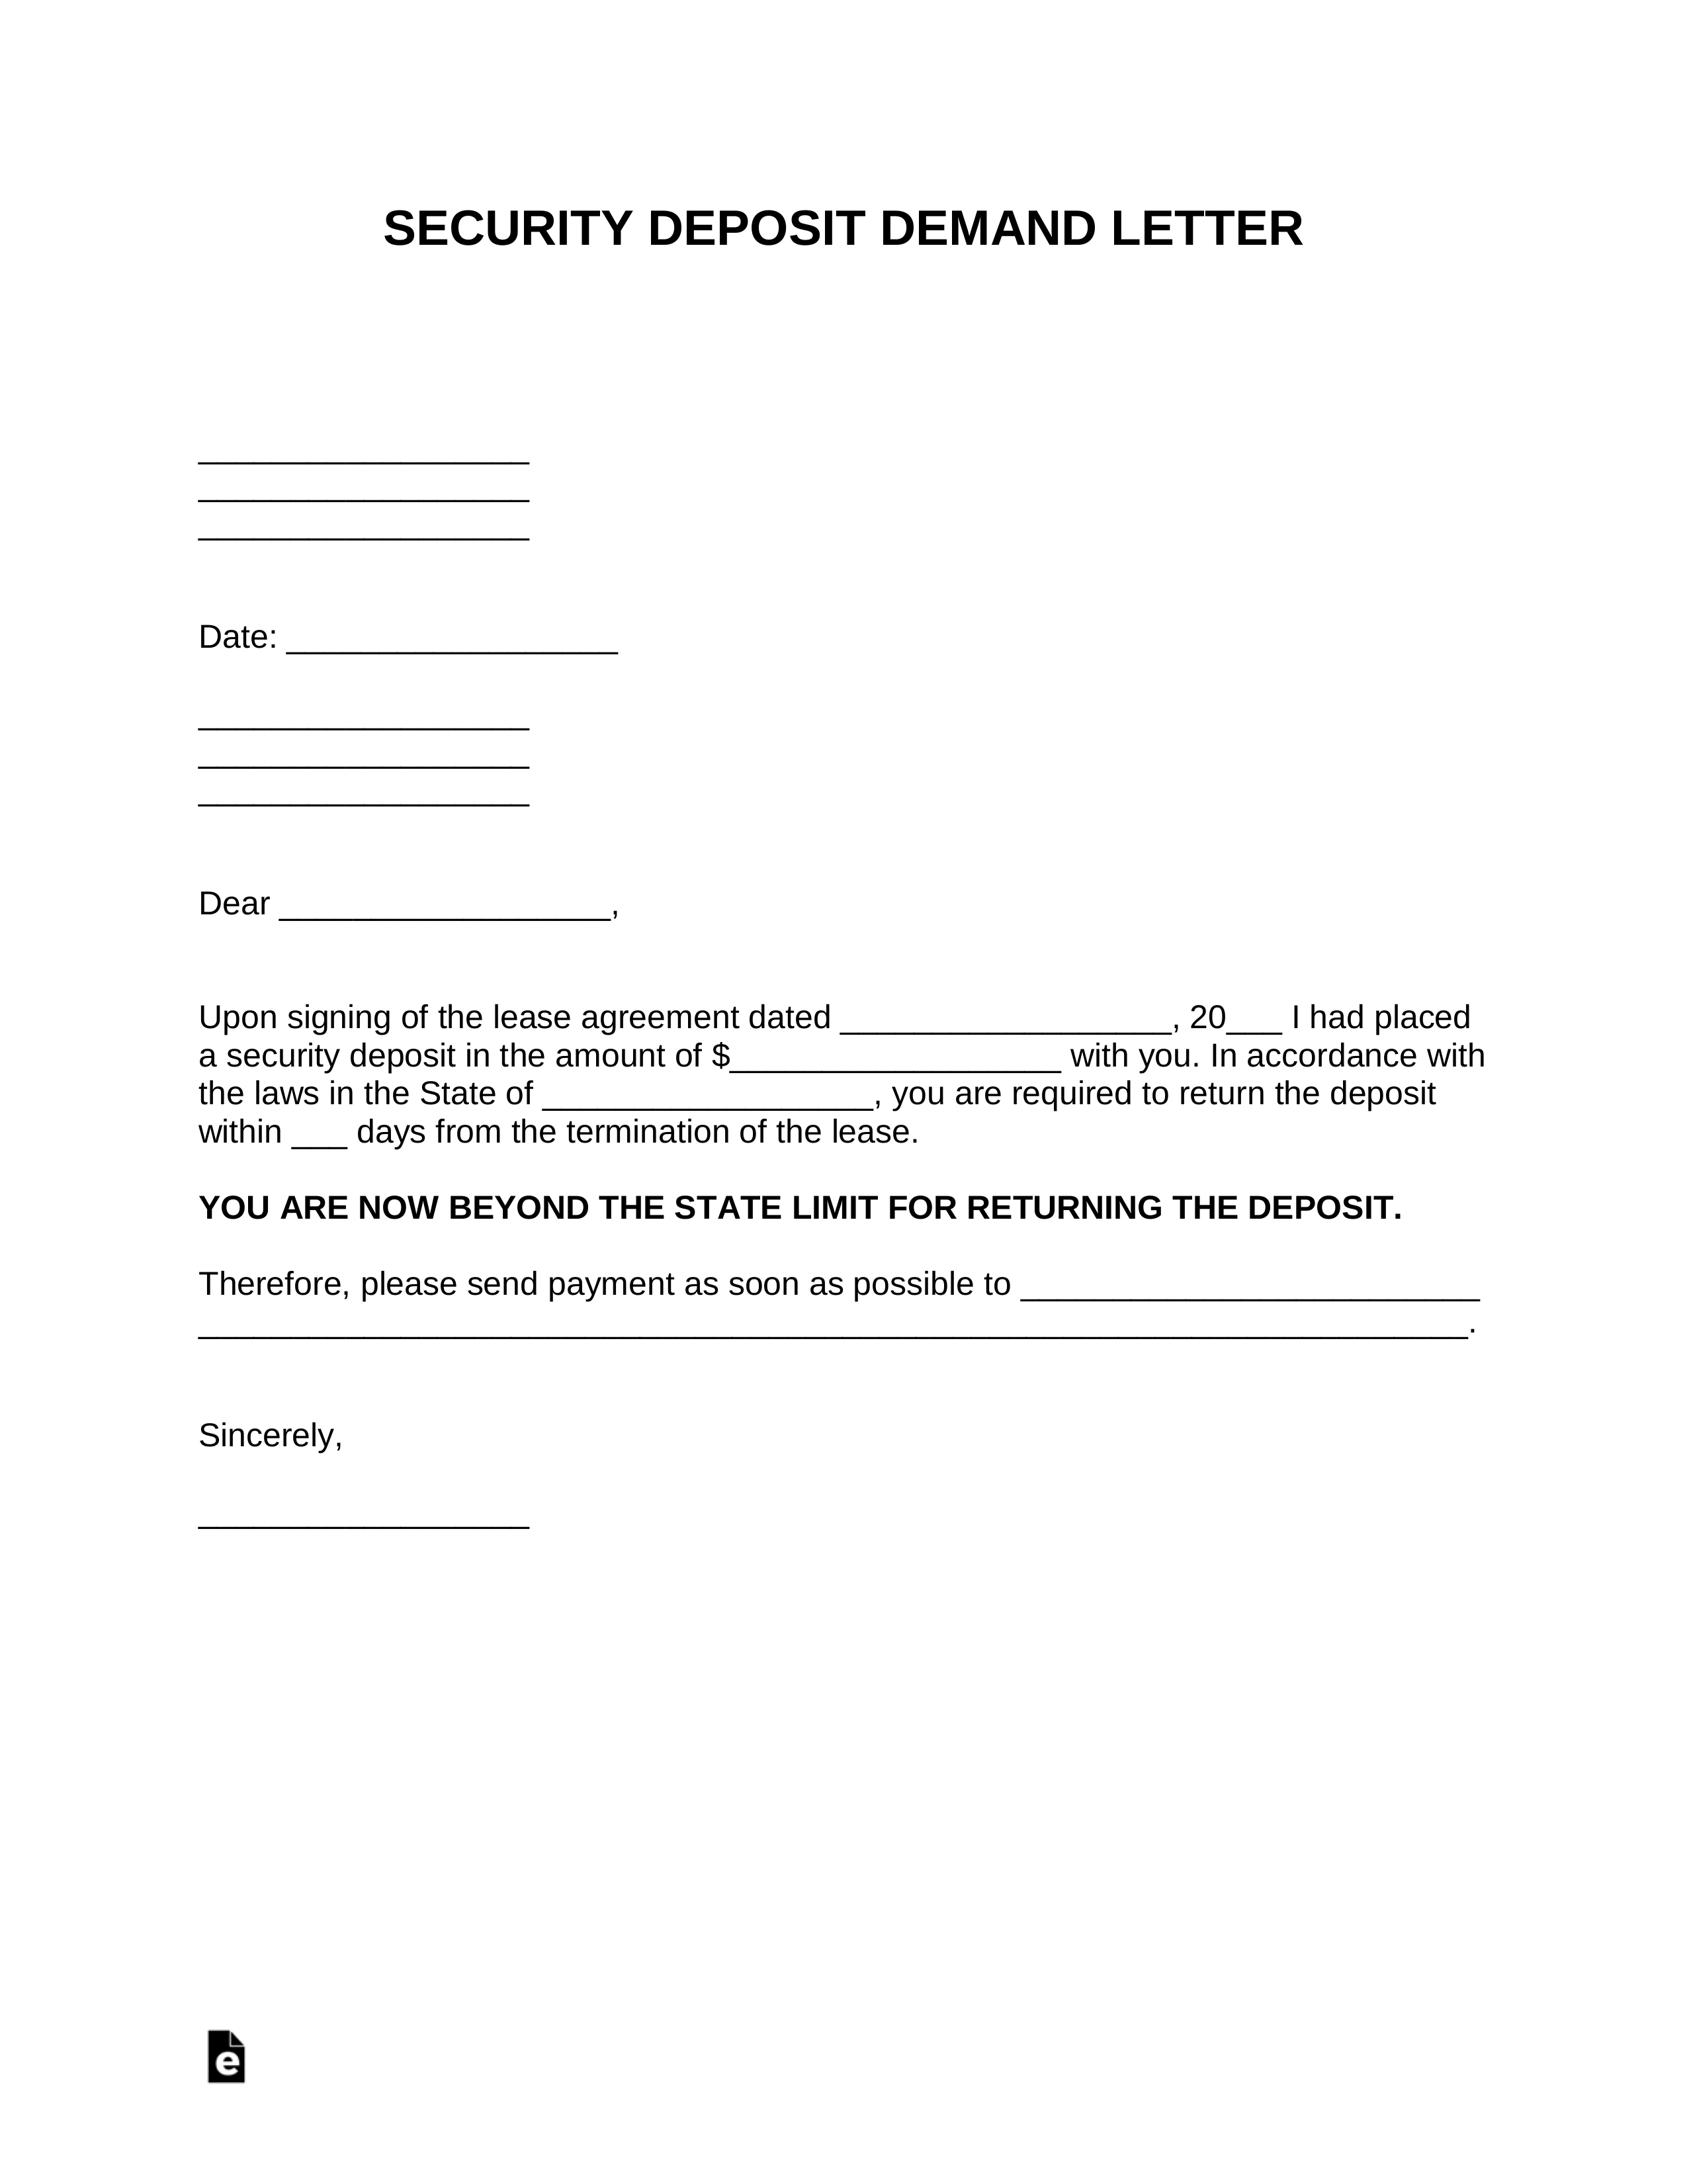 Free Security Deposit Demand Letter Template - PDF  Word – eForms With Security Deposit Return Form Template Throughout Security Deposit Return Form Template